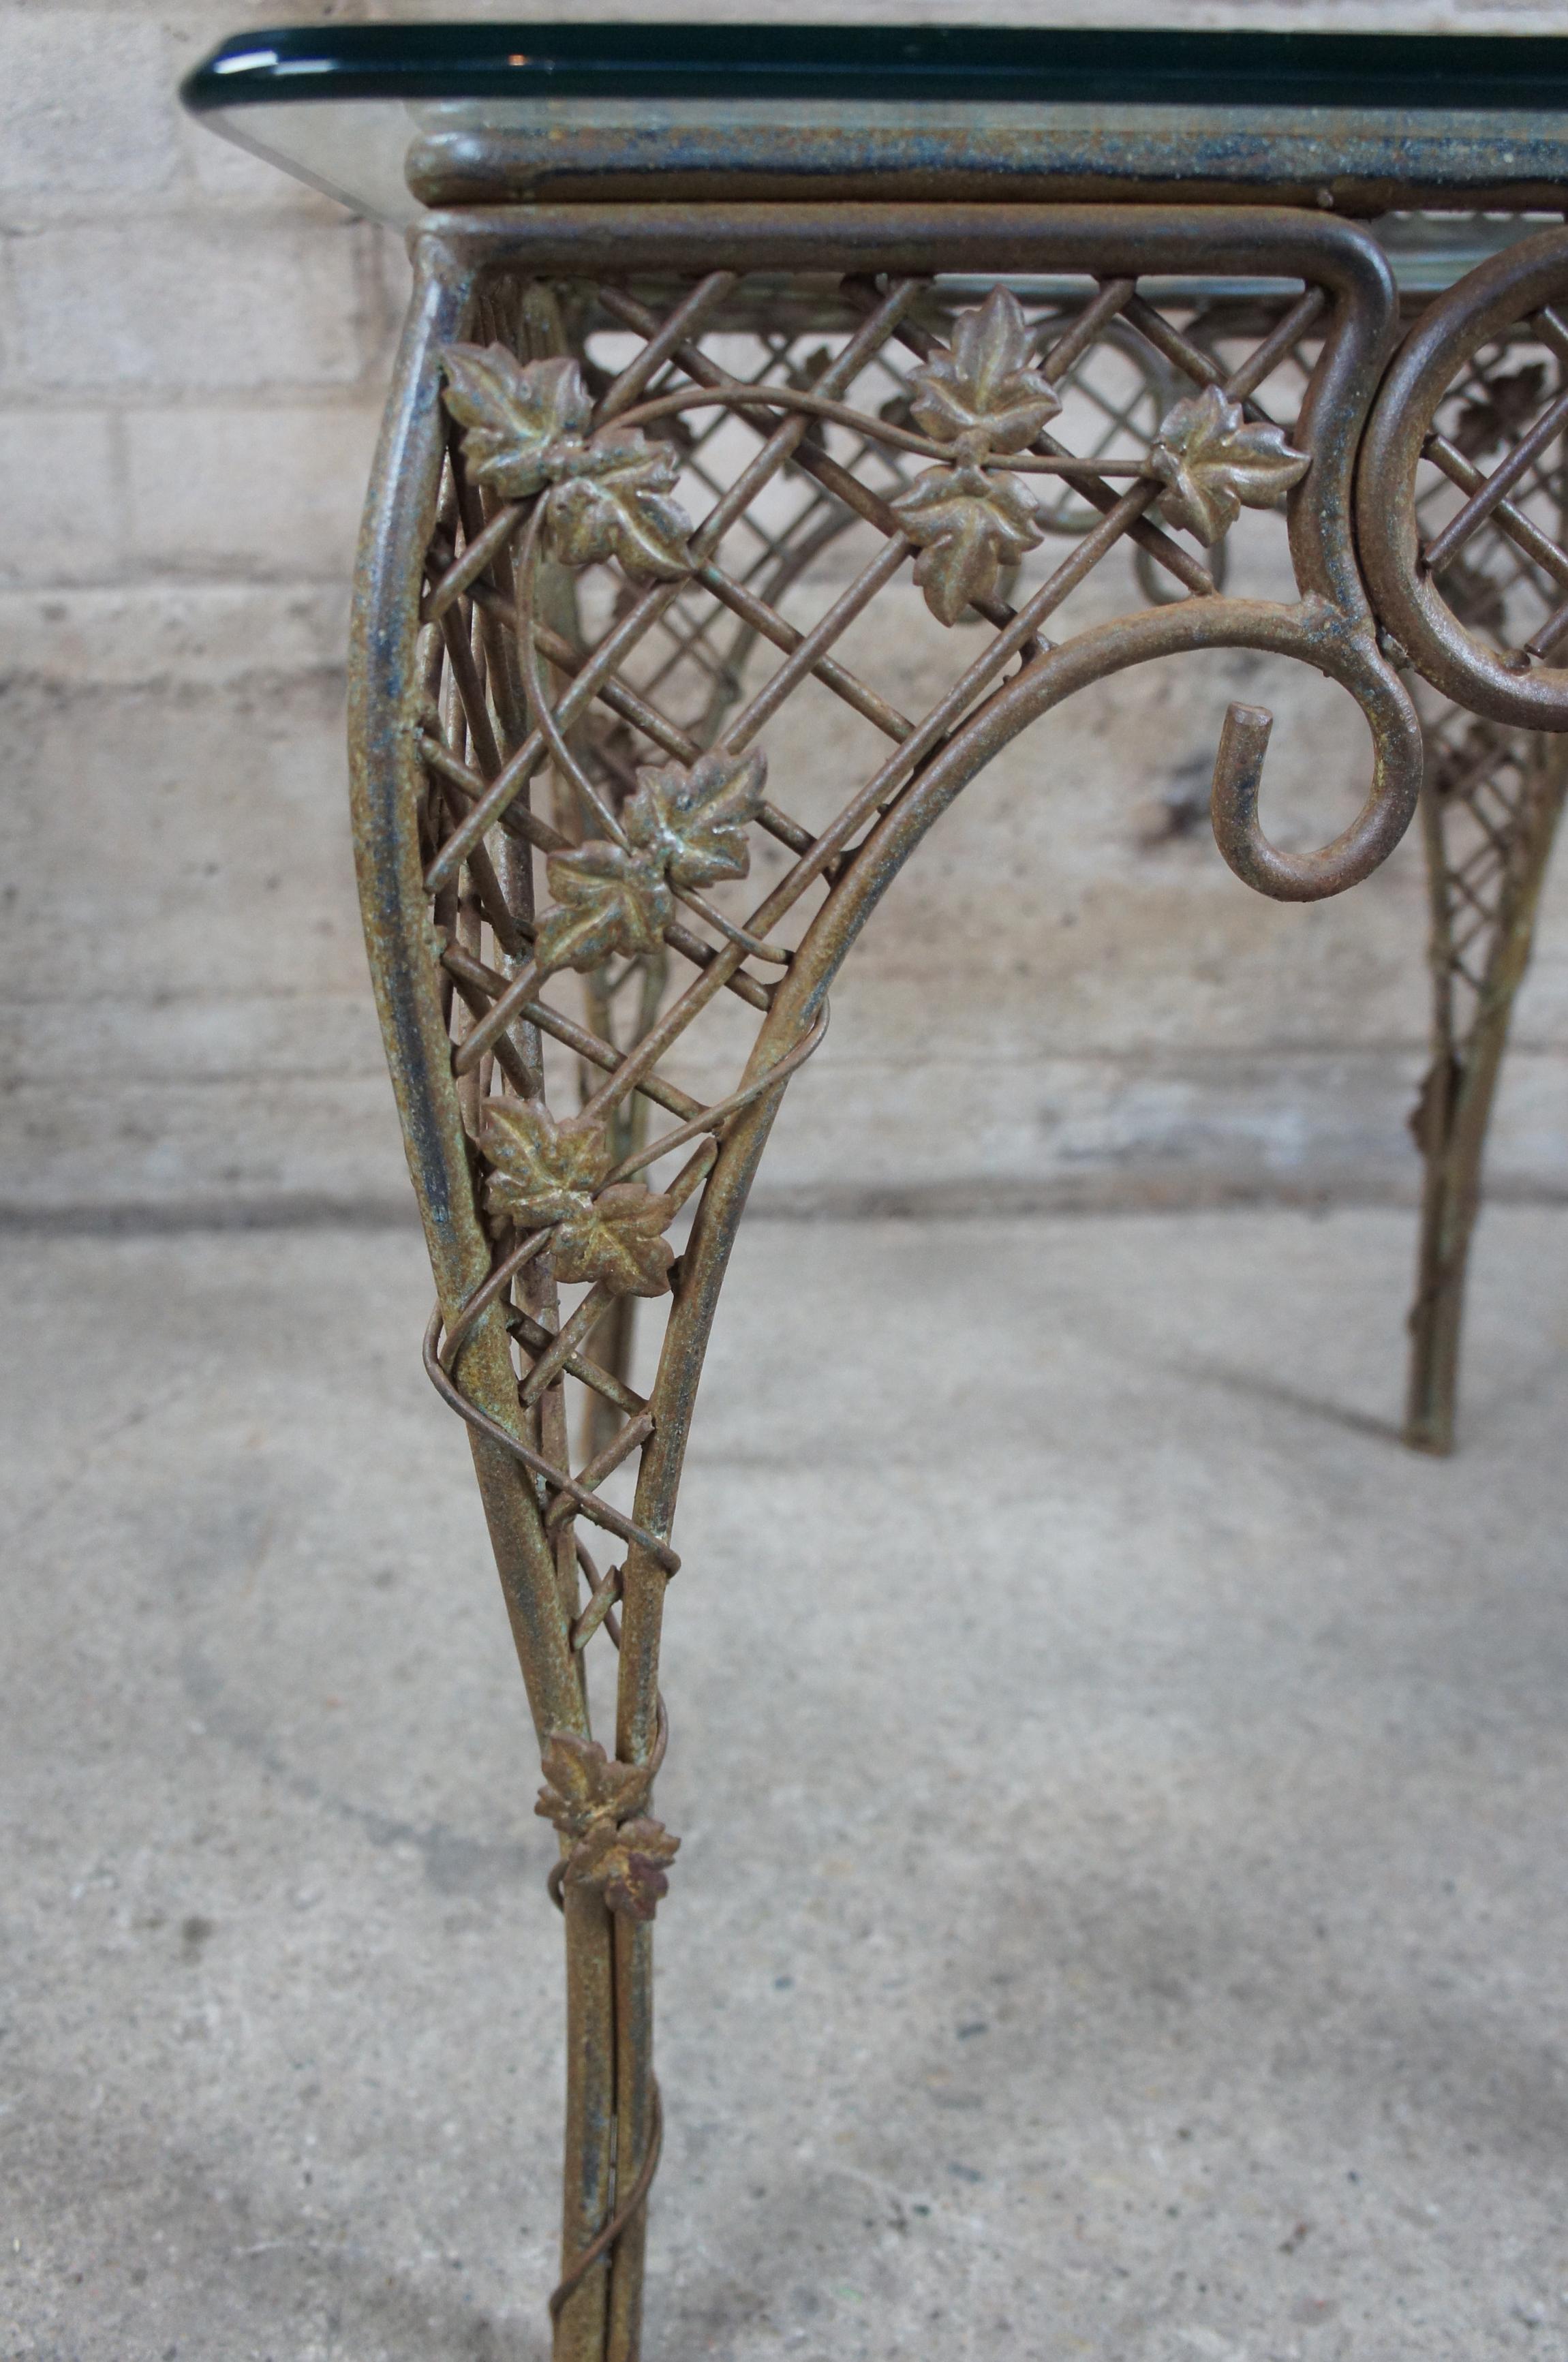 French Provincial Vintage French Wrought Iron Lattice Maple Leaf Design Outdoor Side Patio Table